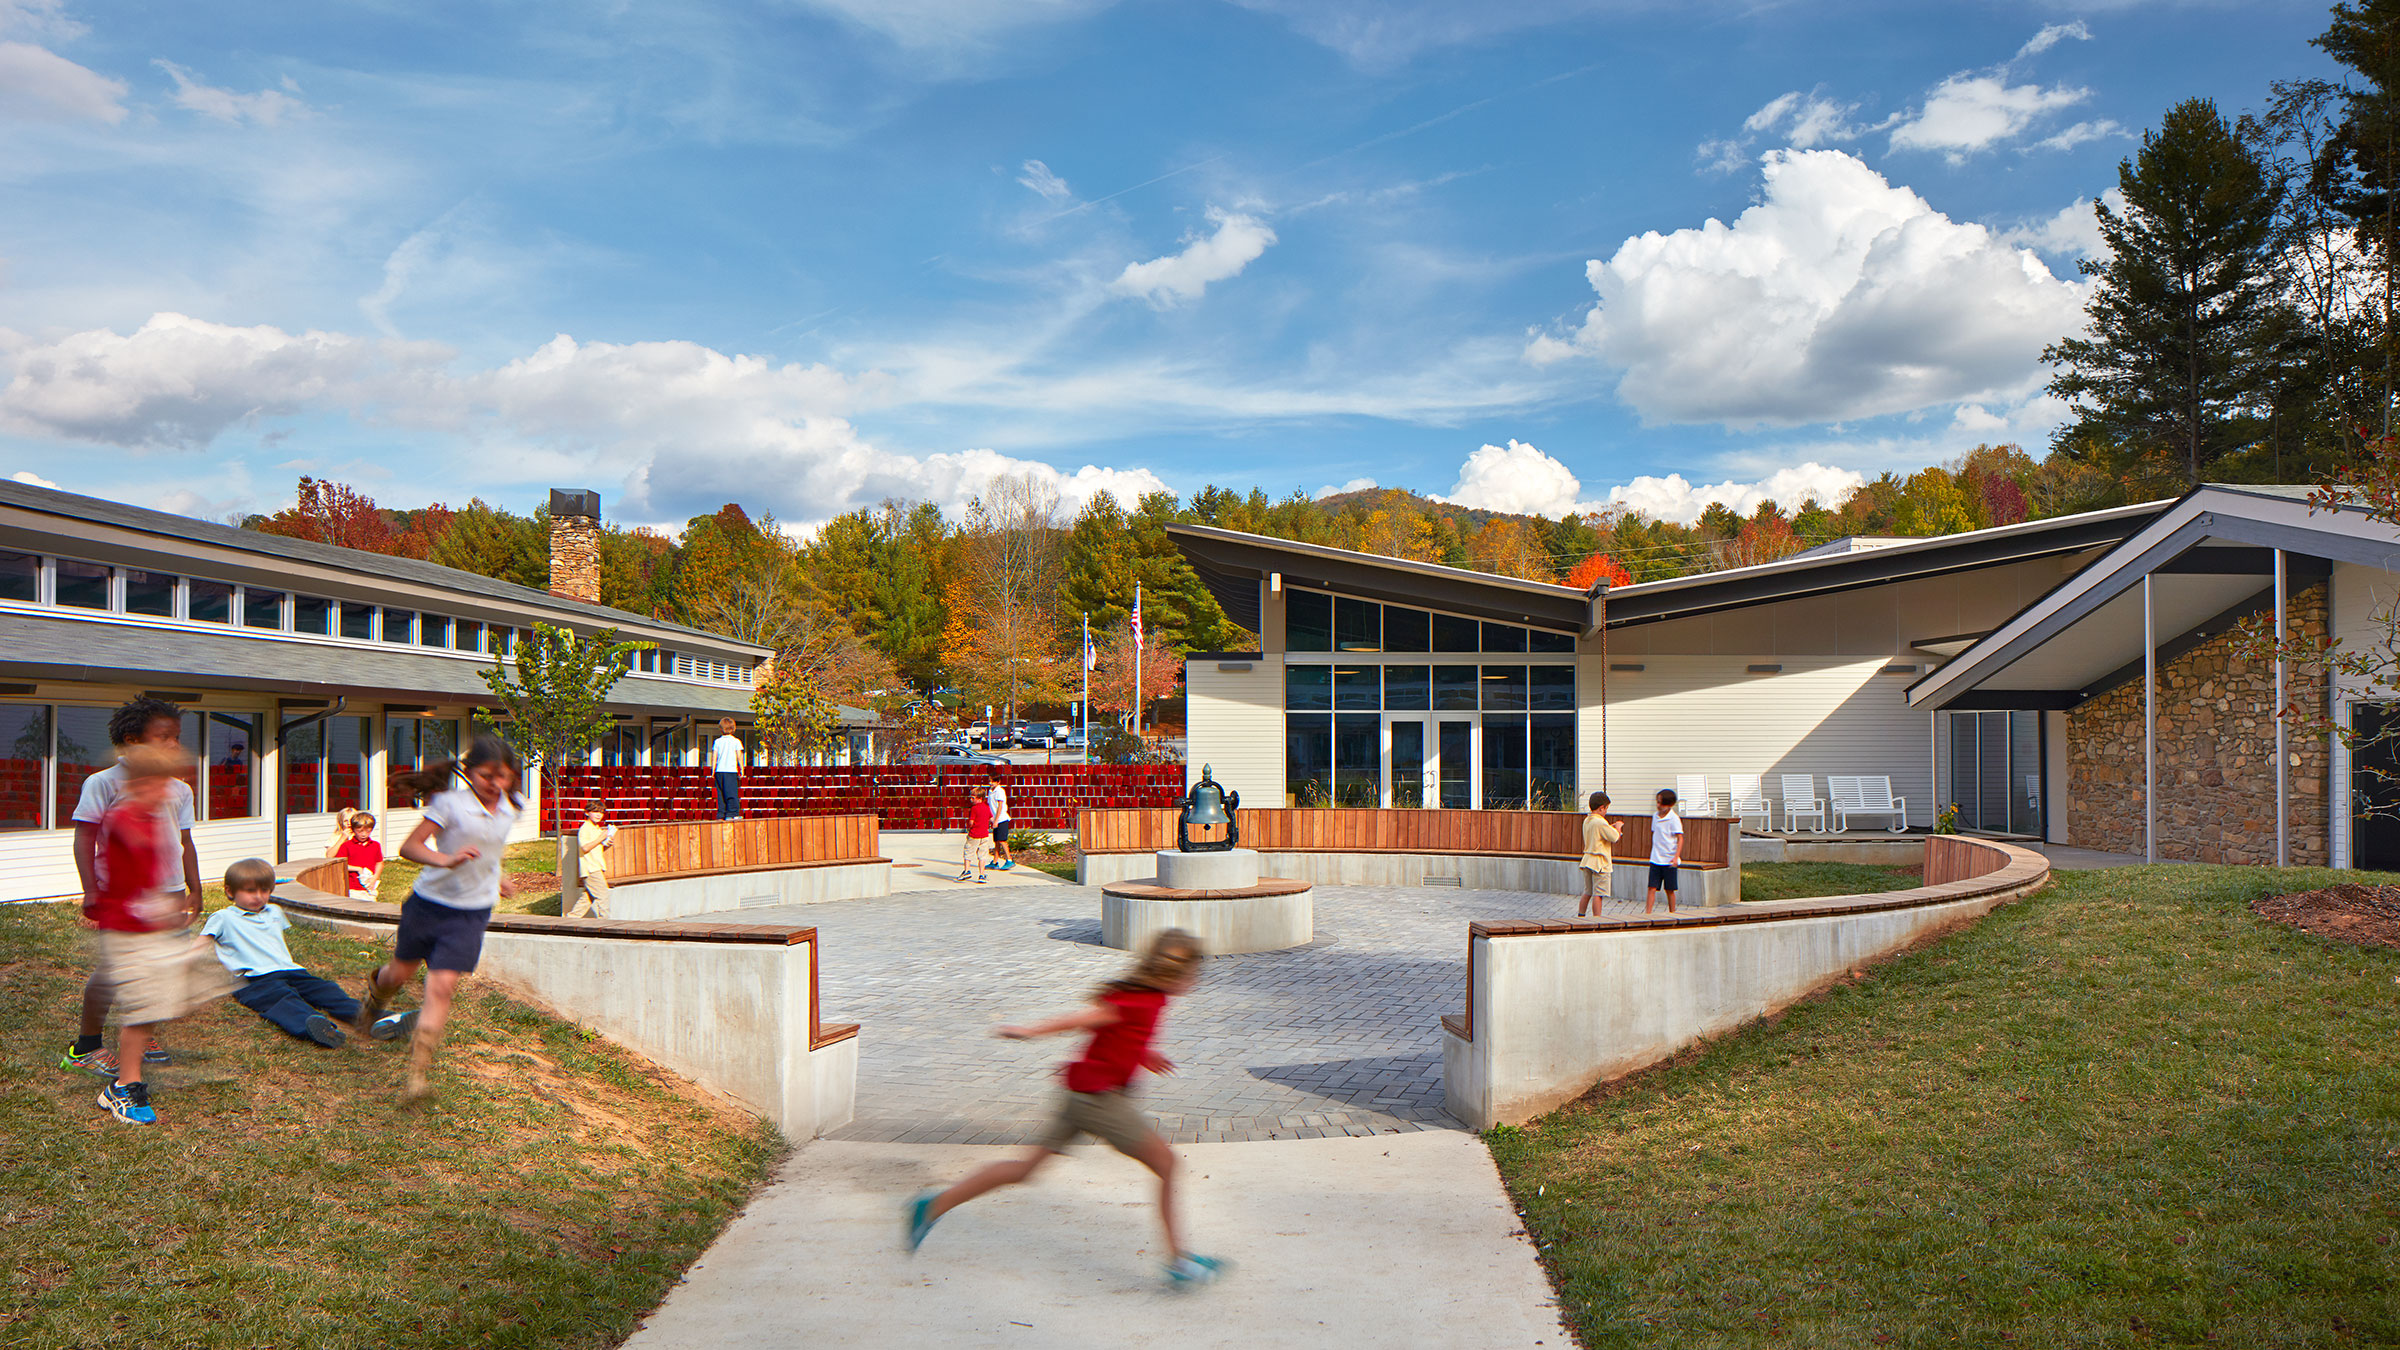 How outdoor environments provide value to K-12 learning, health, and safety